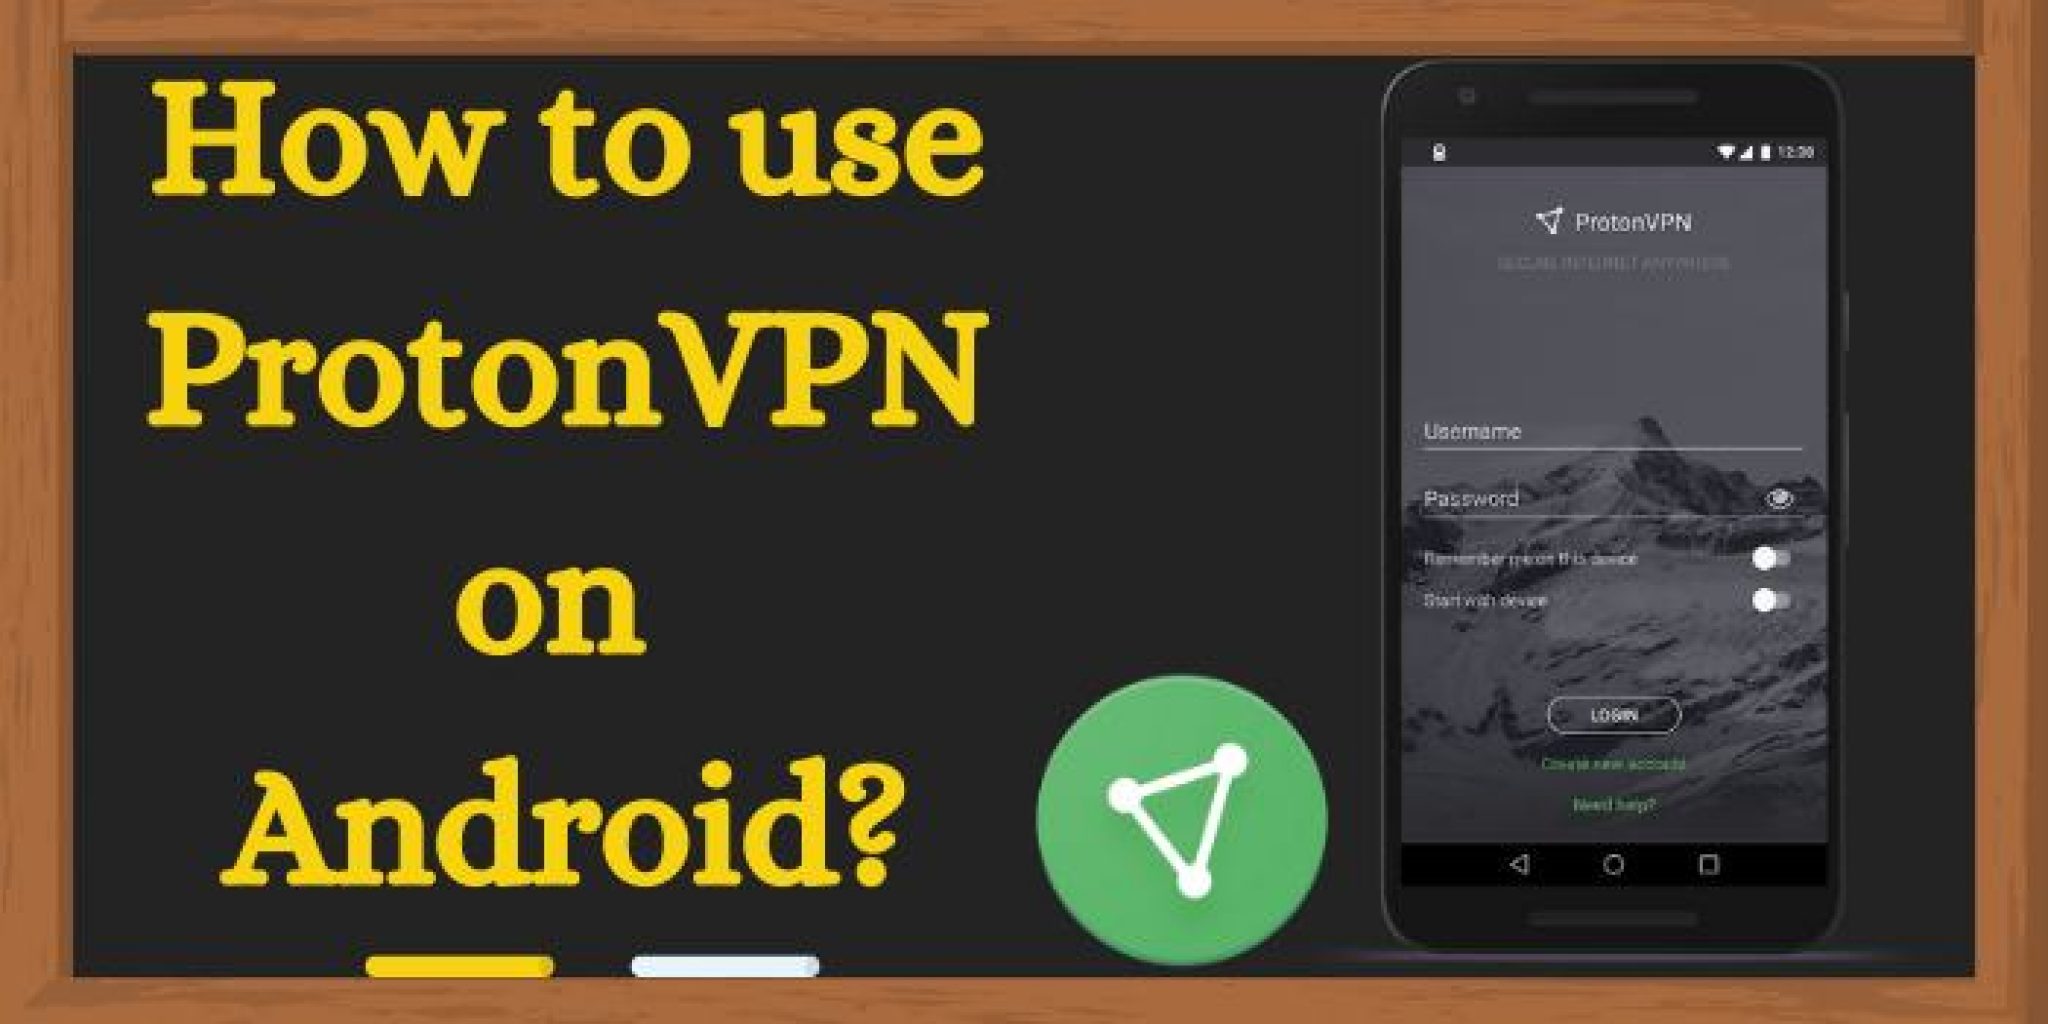 ProtonVPN Free 3.1.0 instal the new version for iphone